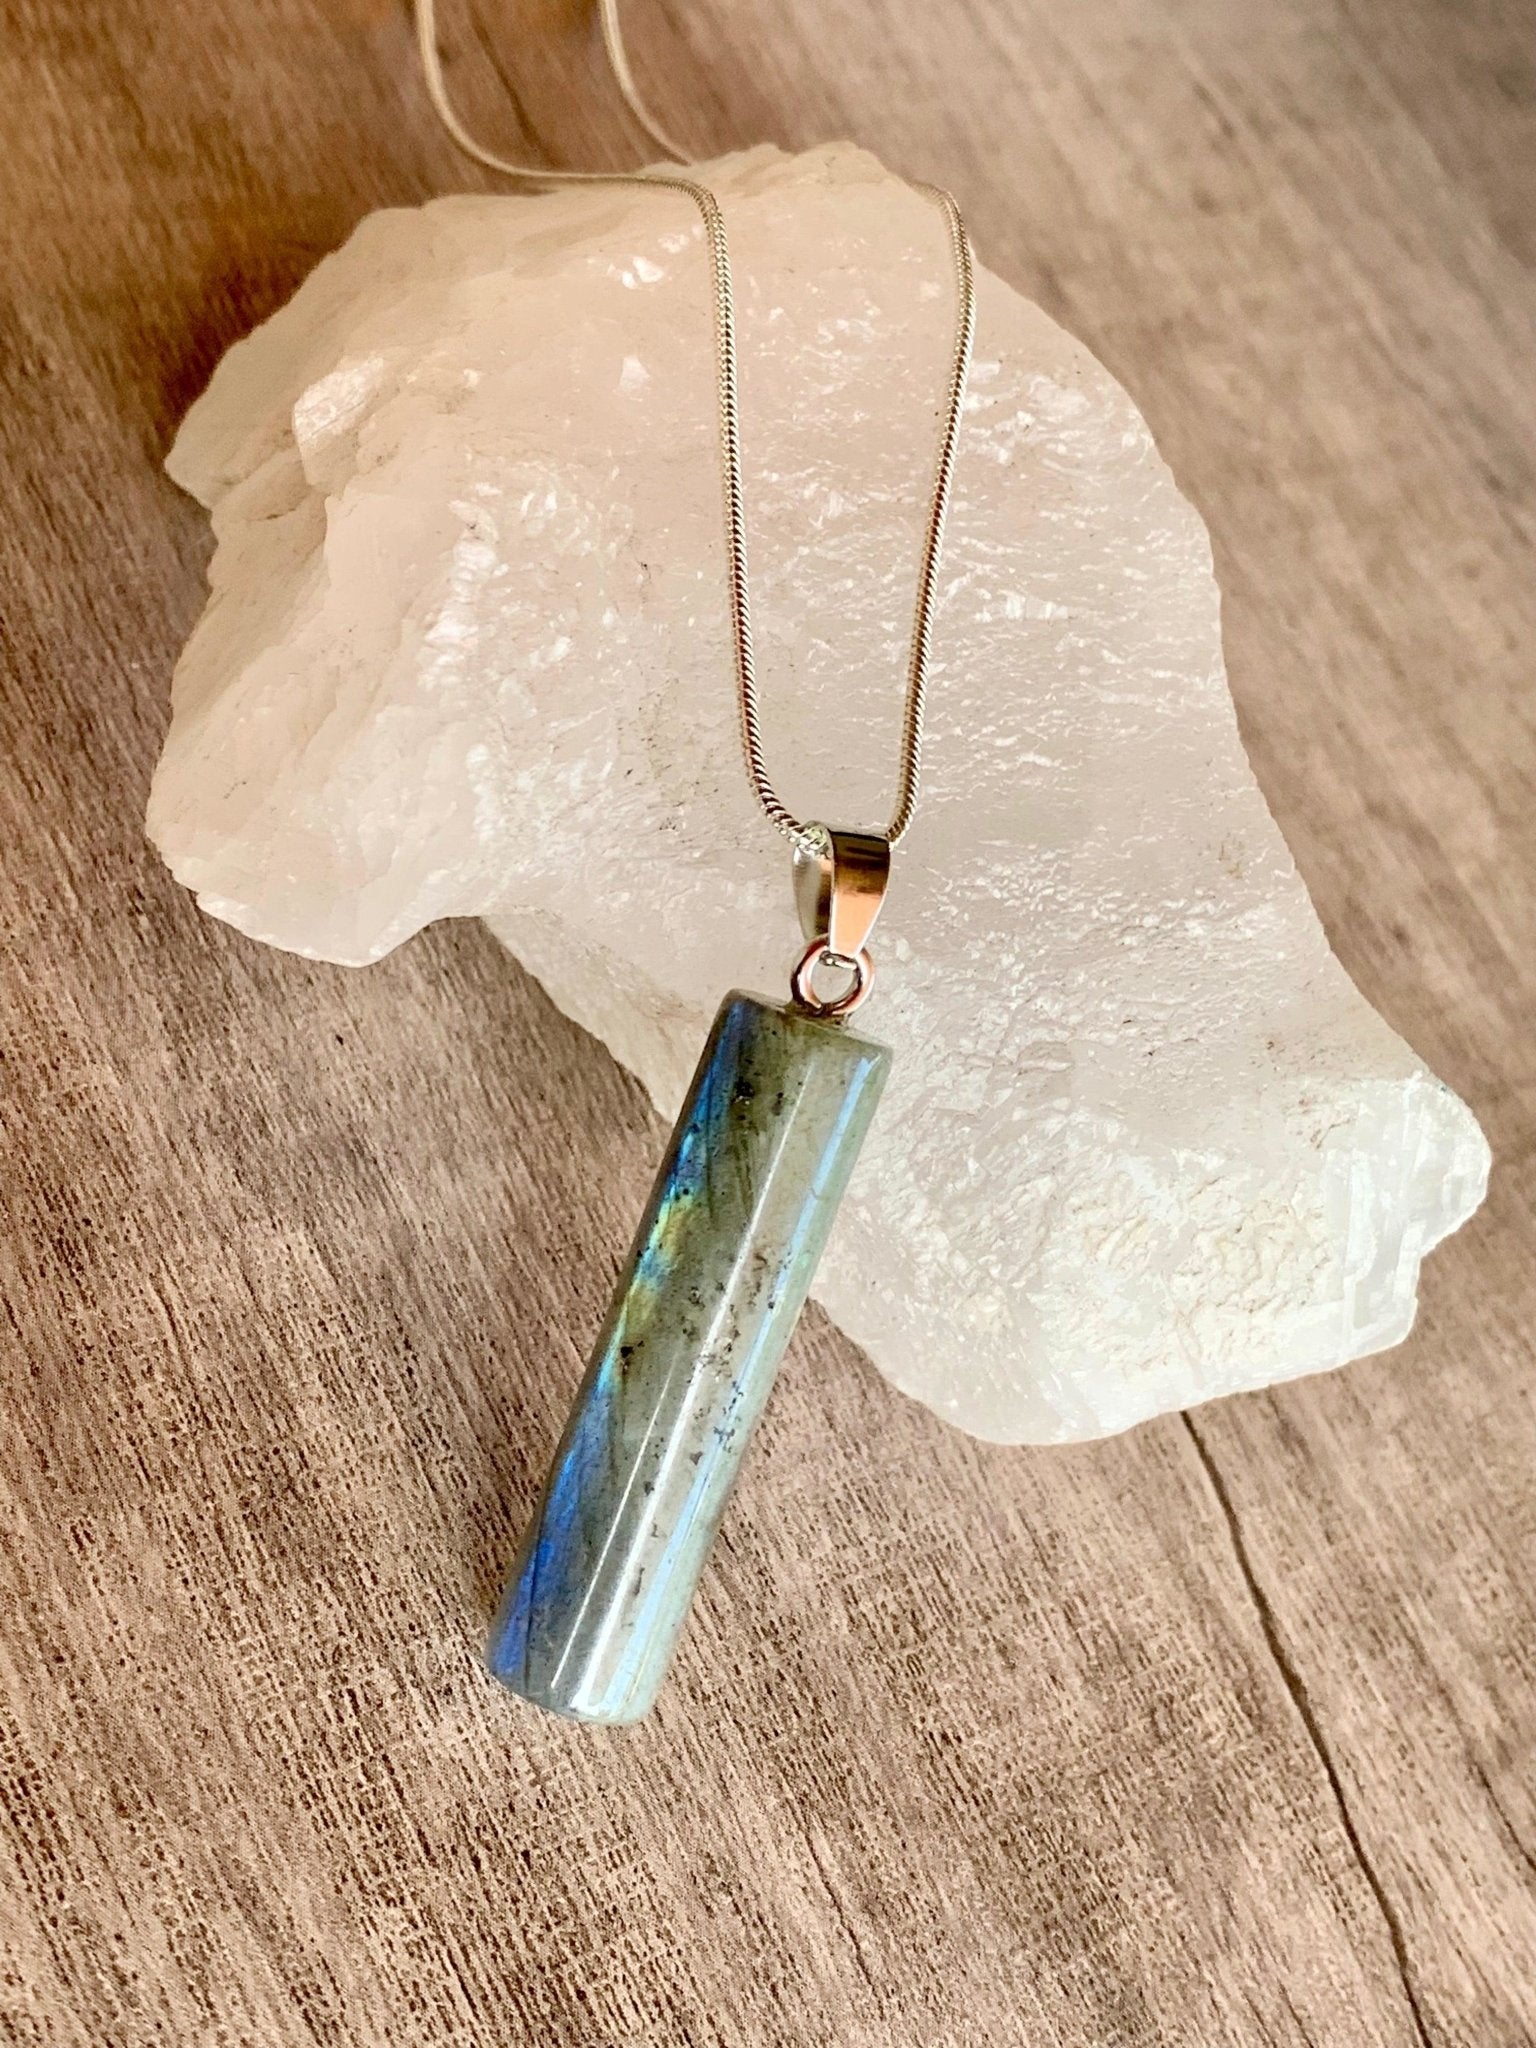 🔴SOLD🔴 Ridge Handcrafted Cylinder Labradorite Pendant on Silver Plated Snake Chain - Born Mystics